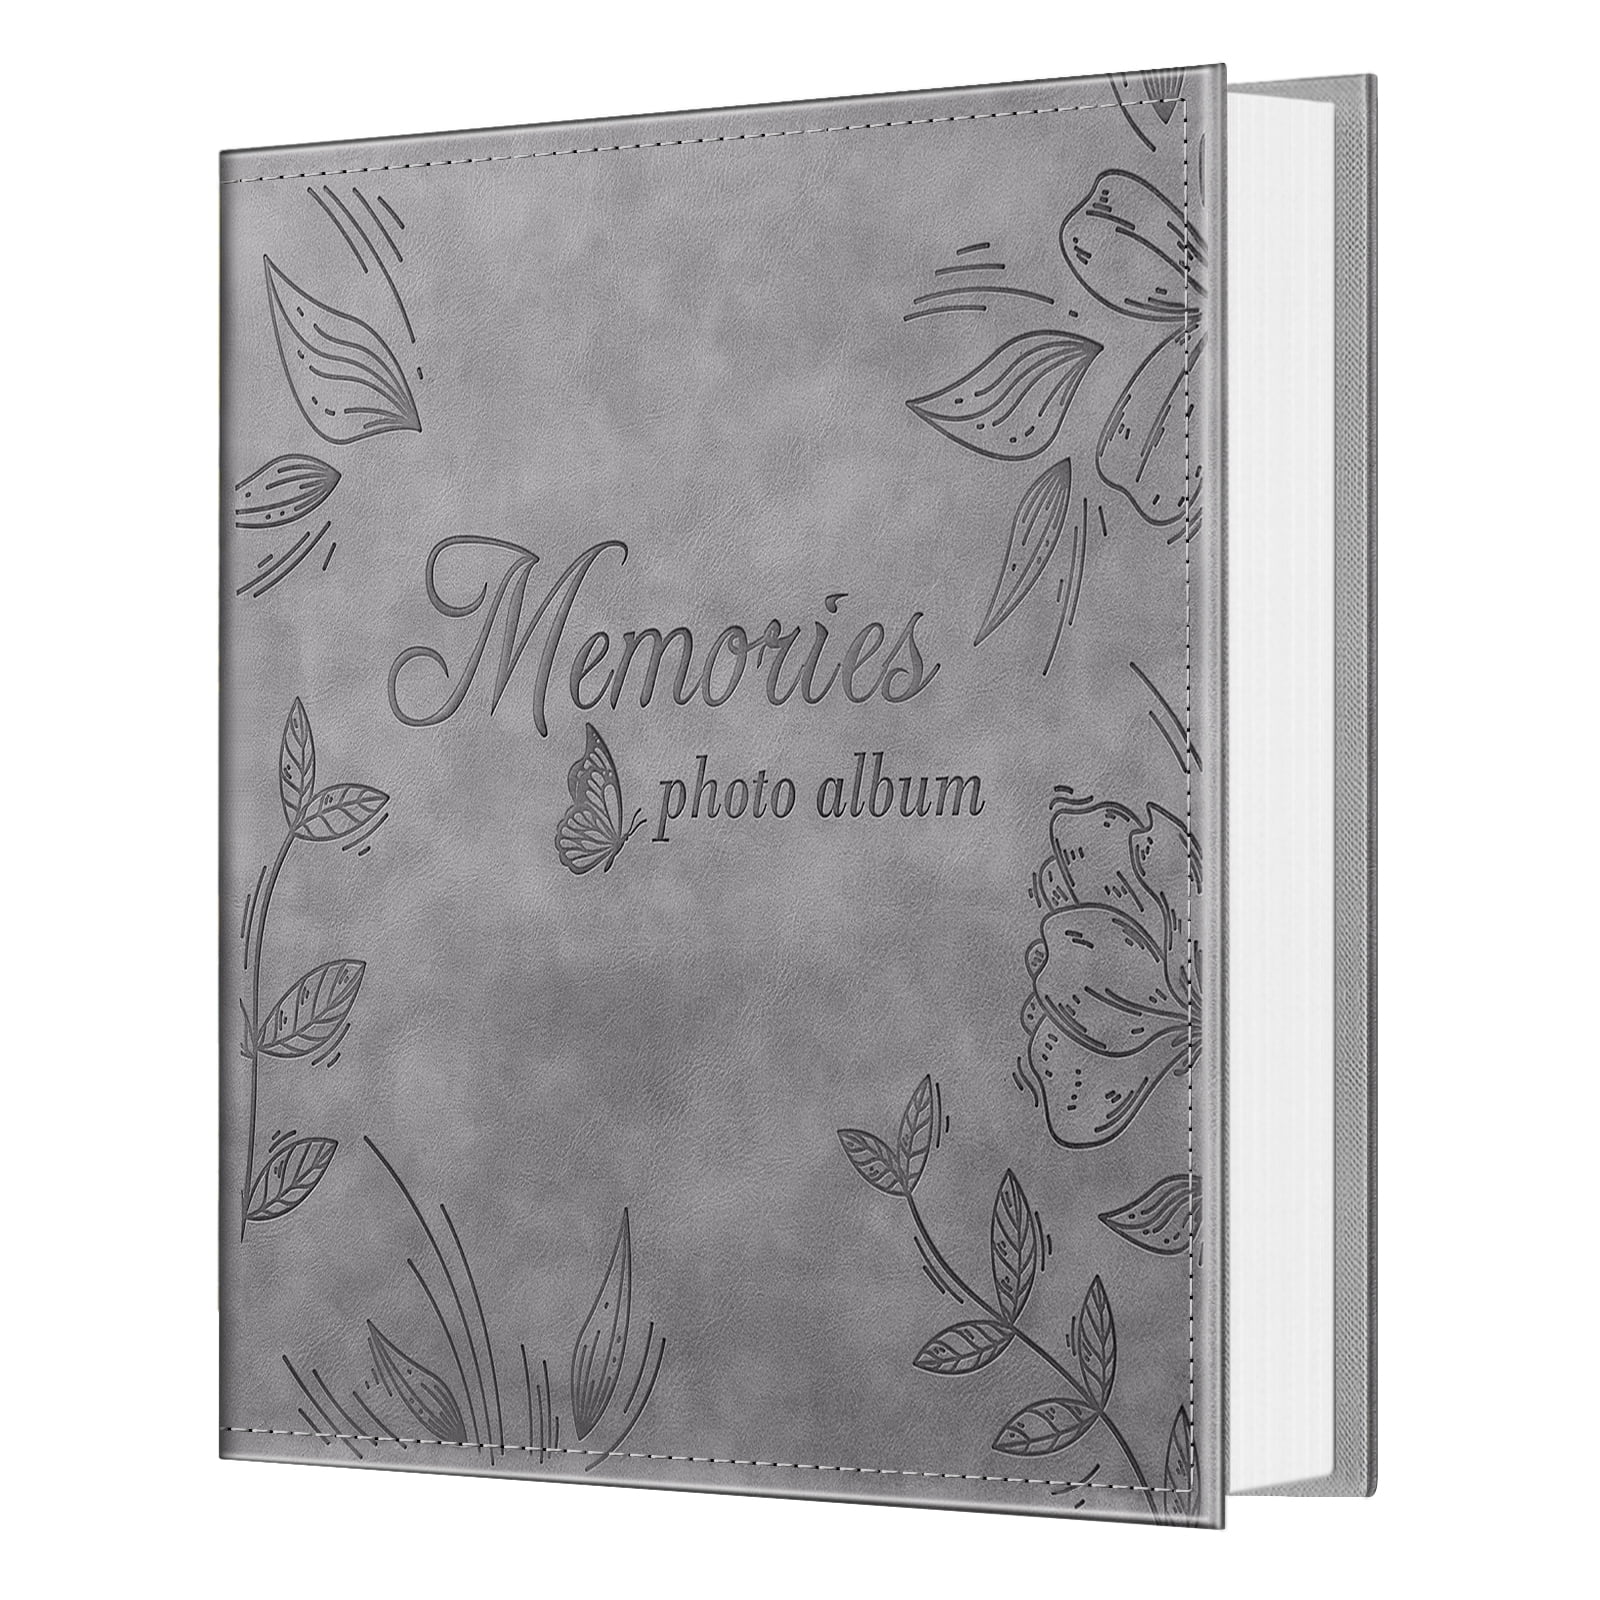 Fintie Photo Album 4x6 Photos - 600 Pockets Large Capacity Photo Book Cover  for Family Wedding Anniversary Baby Vacation Pictures,Ocean Marble 